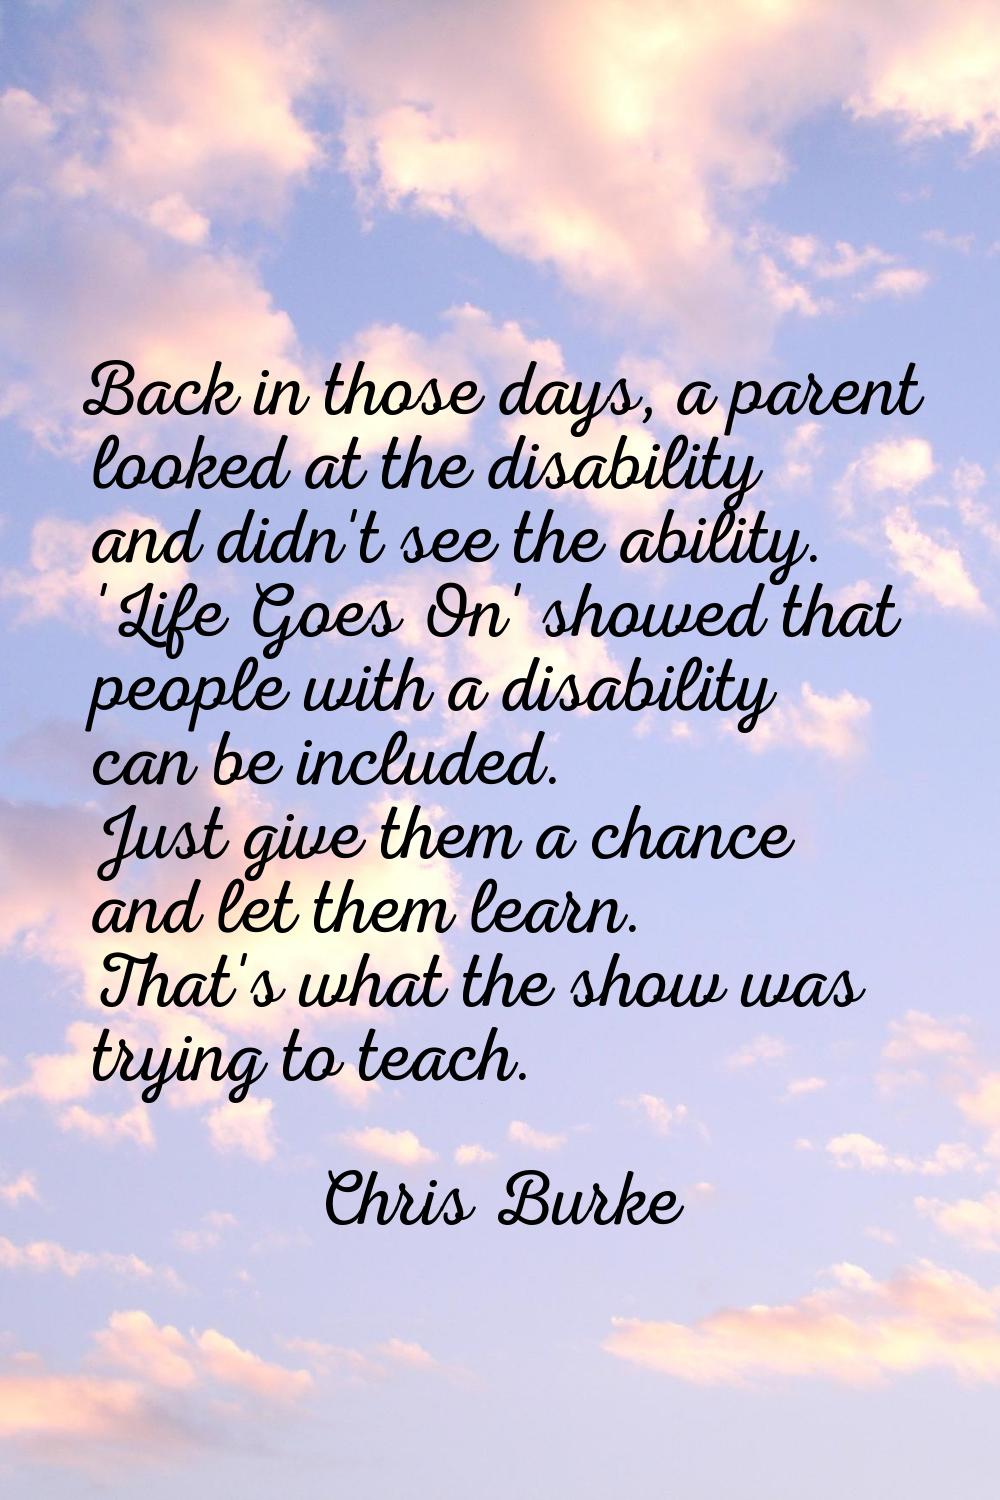 Back in those days, a parent looked at the disability and didn't see the ability. 'Life Goes On' sh